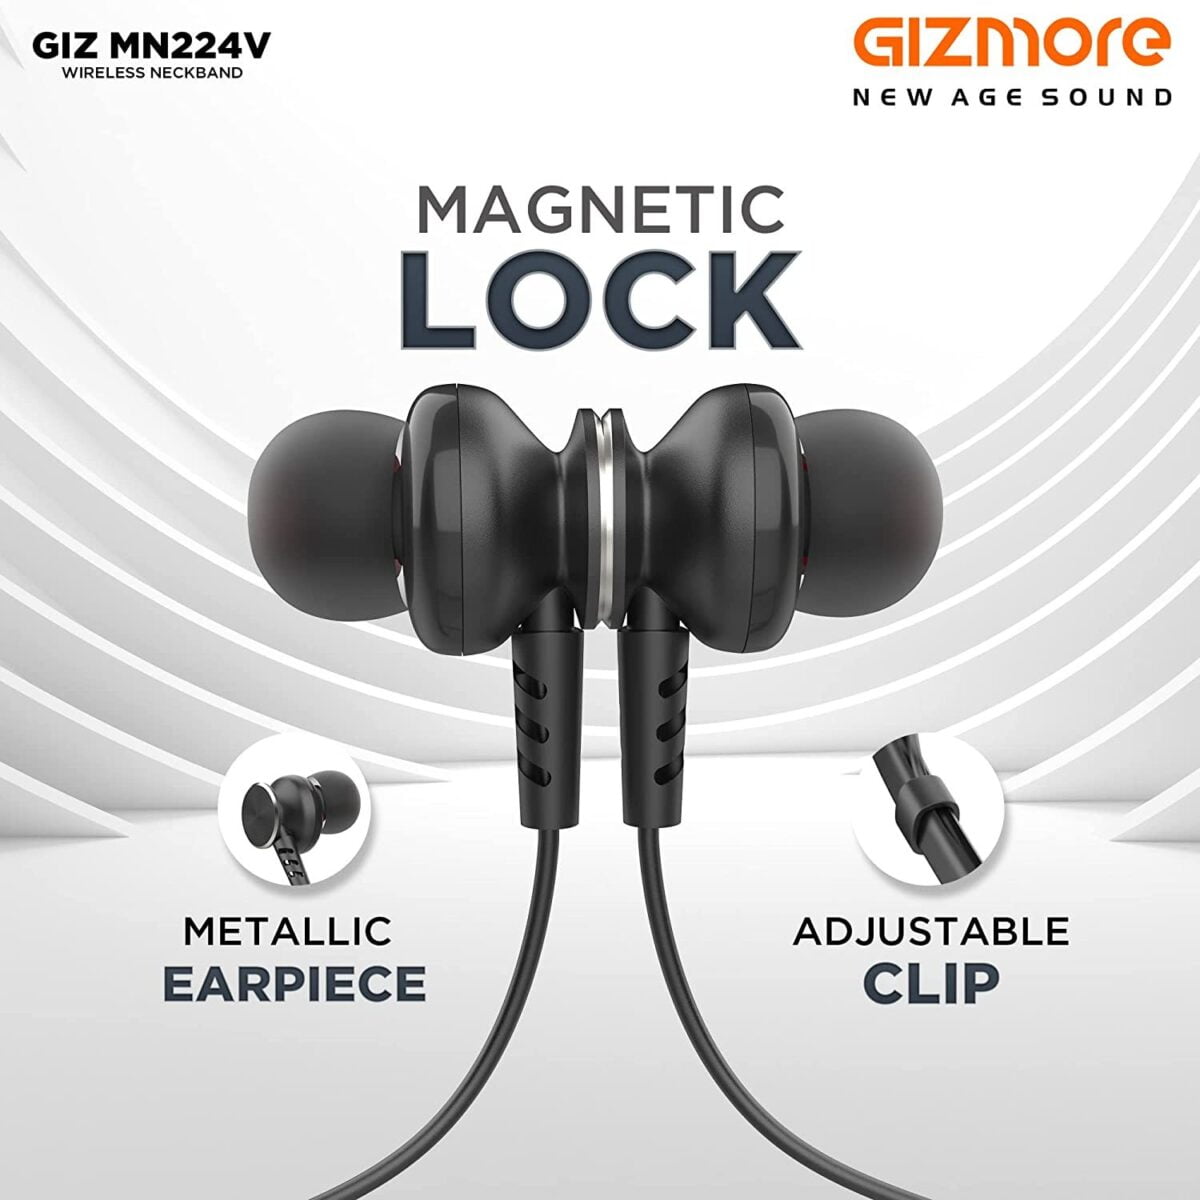 Gizmore MN224V Bluetooth Wireless Neckband 6 Shop Mobile Accessories Online in India